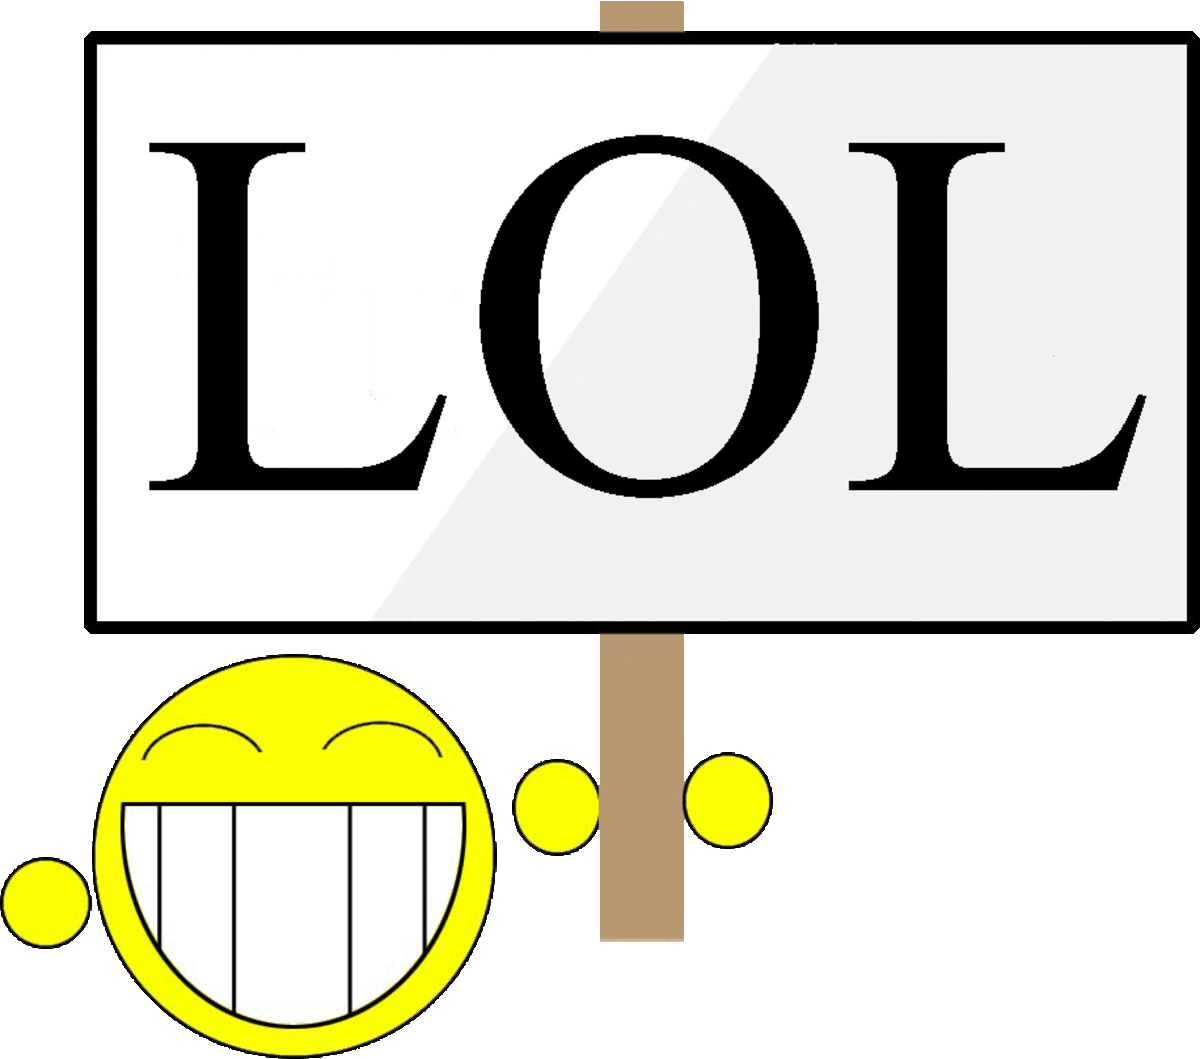 Symbolic language and the 'laugh out loud' acronym